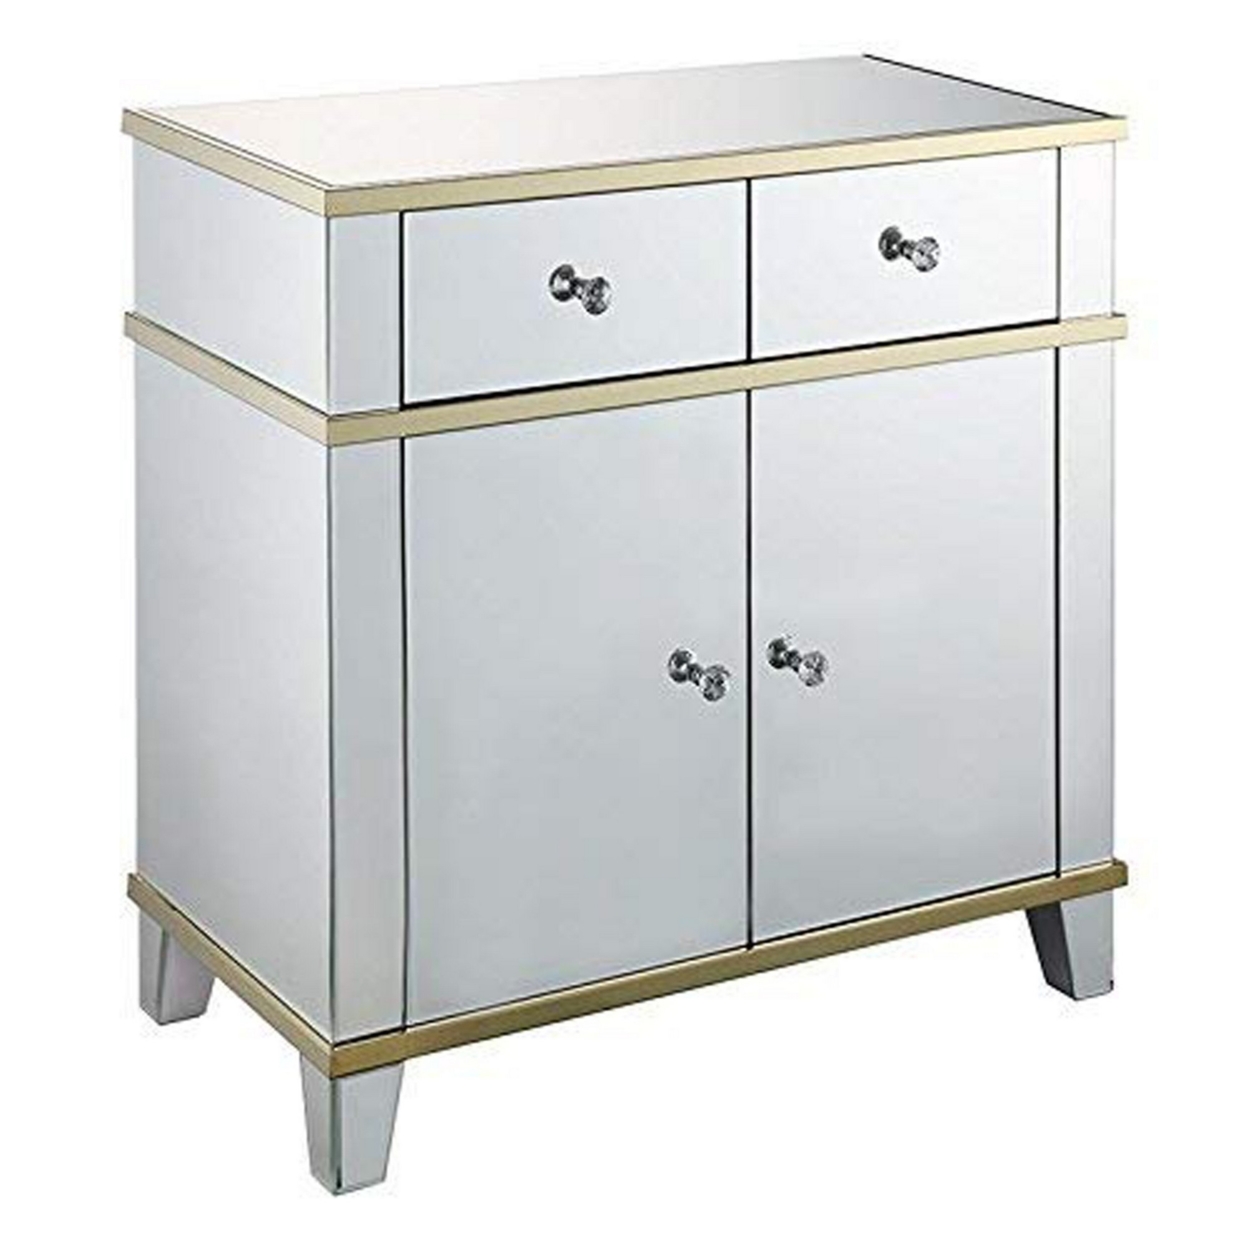 Fully Mirrored Wooden Console Table With Two Drawers And One Cabinet, Silver- Saltoro Sherpi